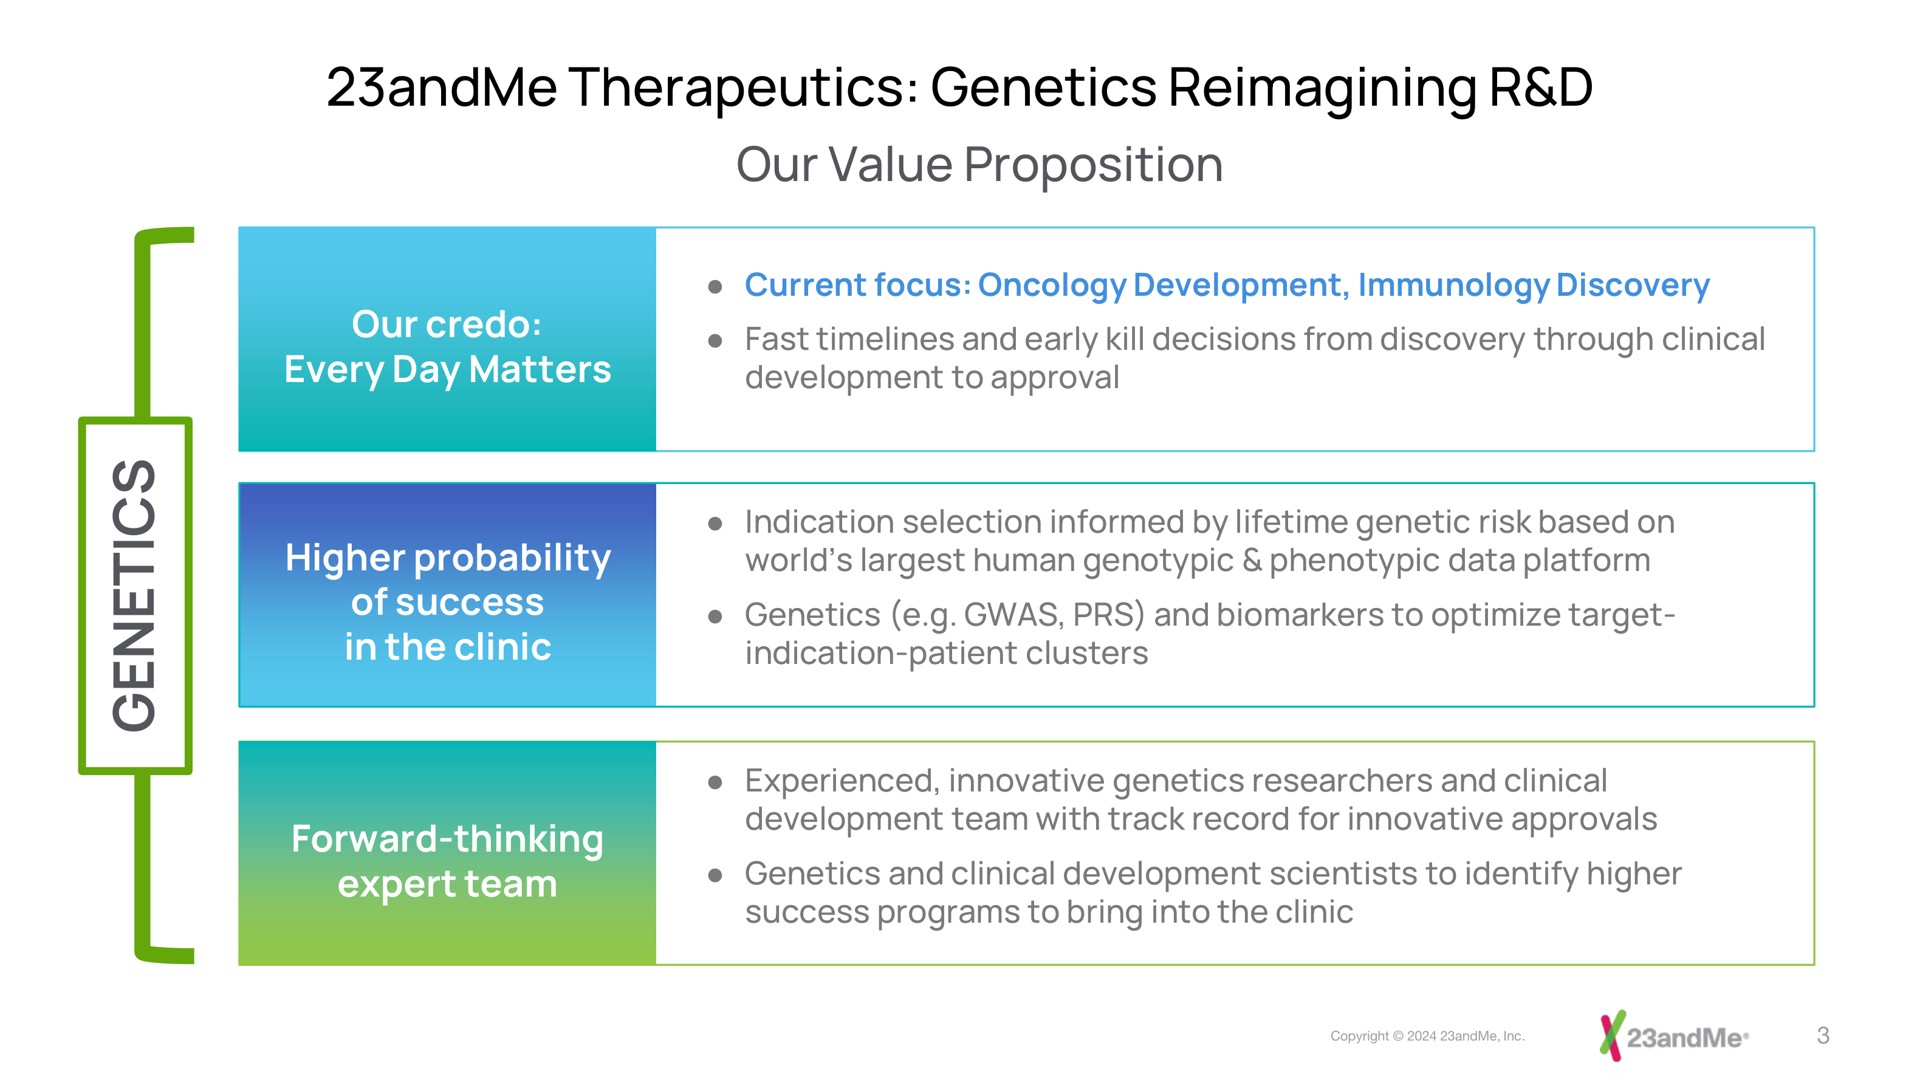 therapeutics genetics our value proposition | 23andMe